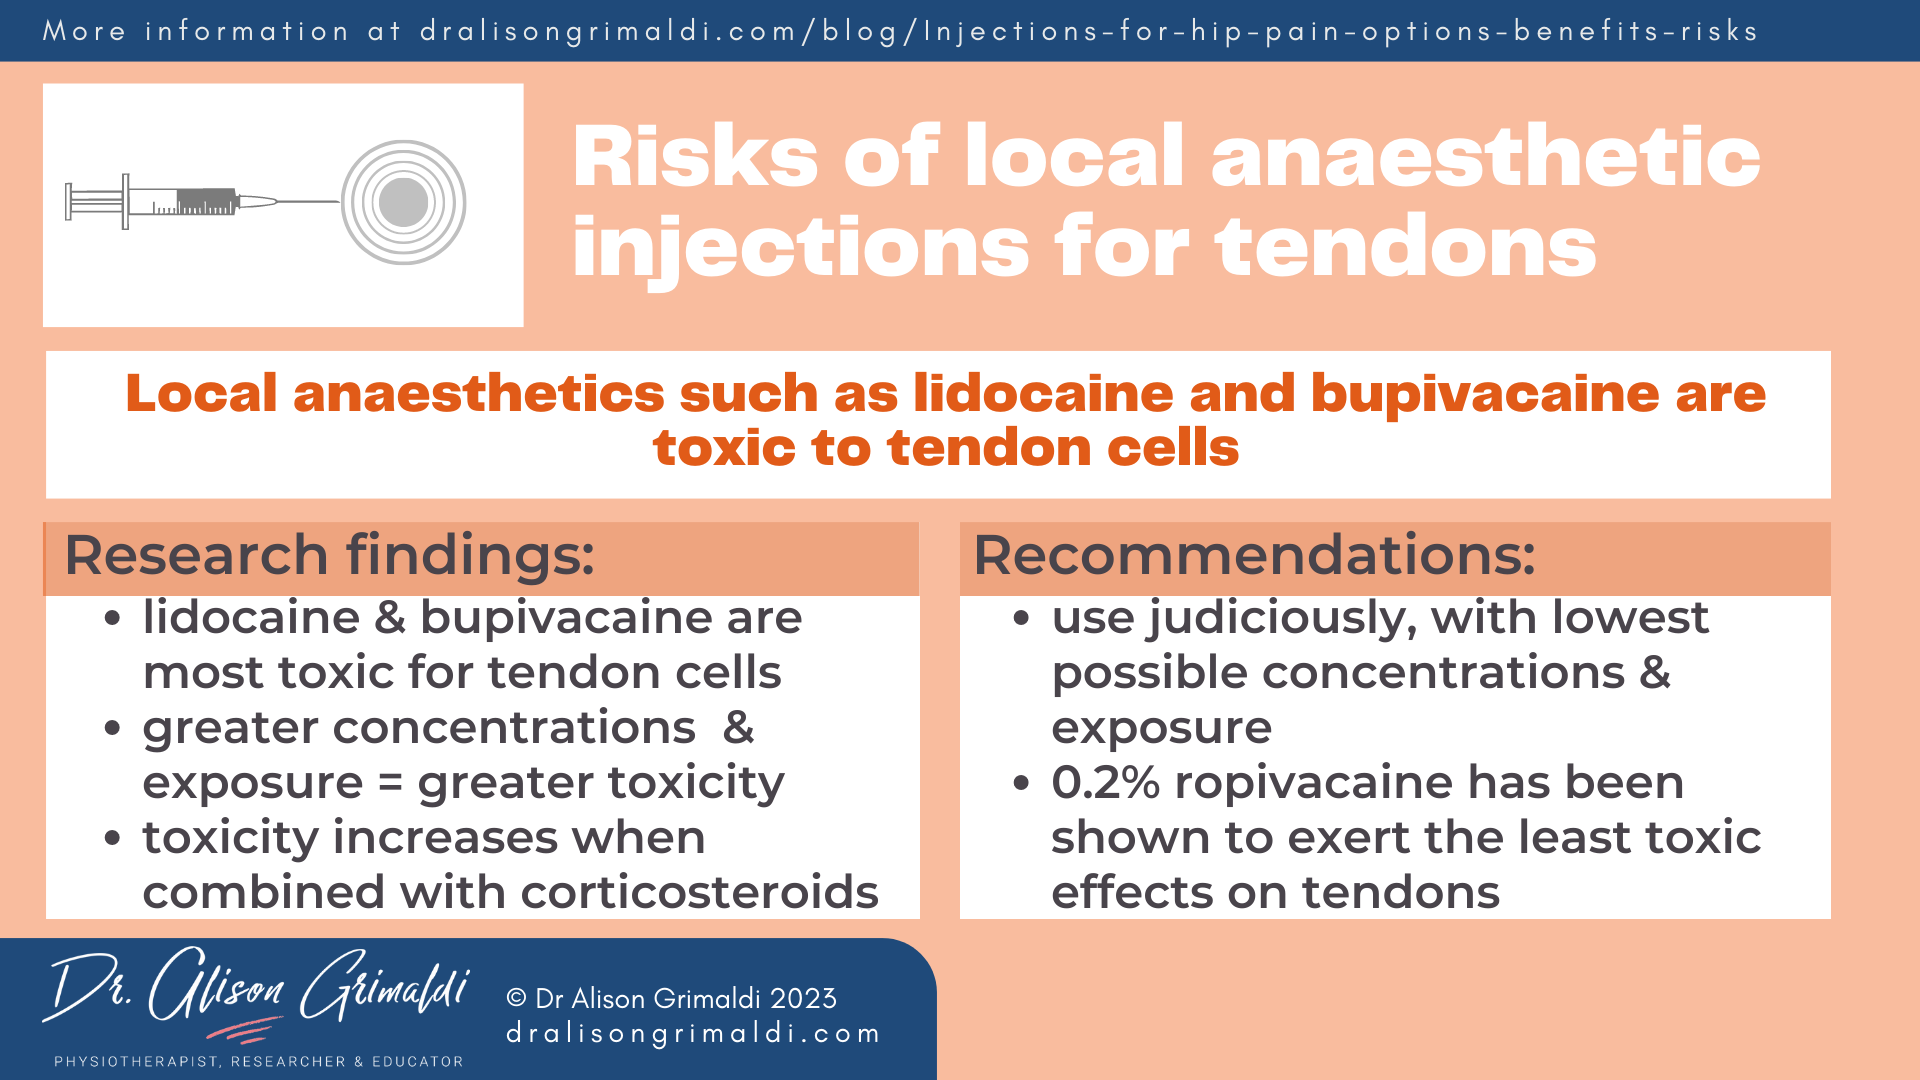 Risks of local anaesthetic injections for tendons